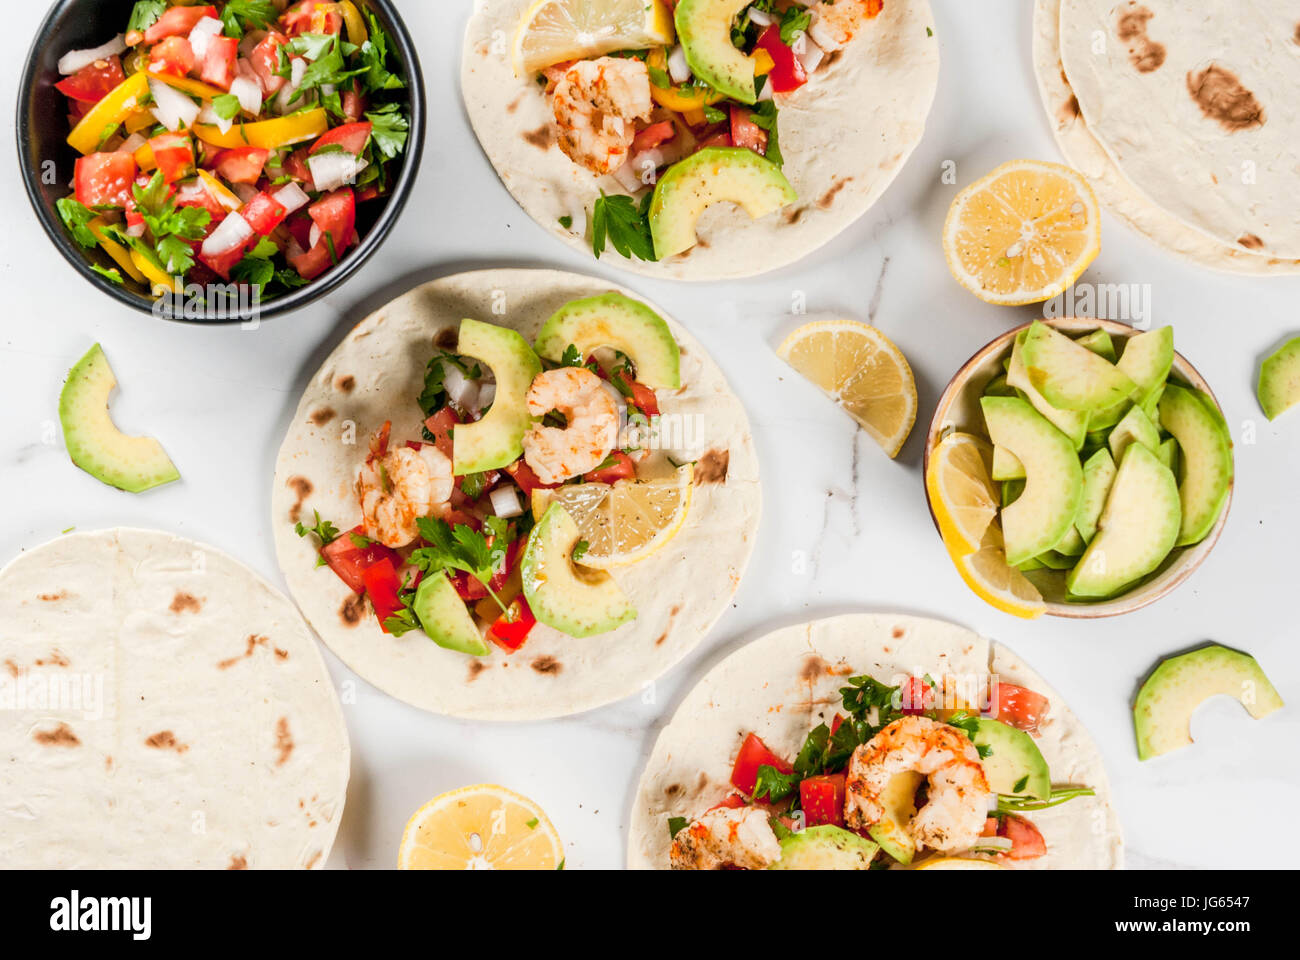 Seafood. Mexican food. Tortilla tacos with traditional homemade salsa salad, parsley, fresh lemon, avocado and grilled shrimp pawns. On a white marble Stock Photo